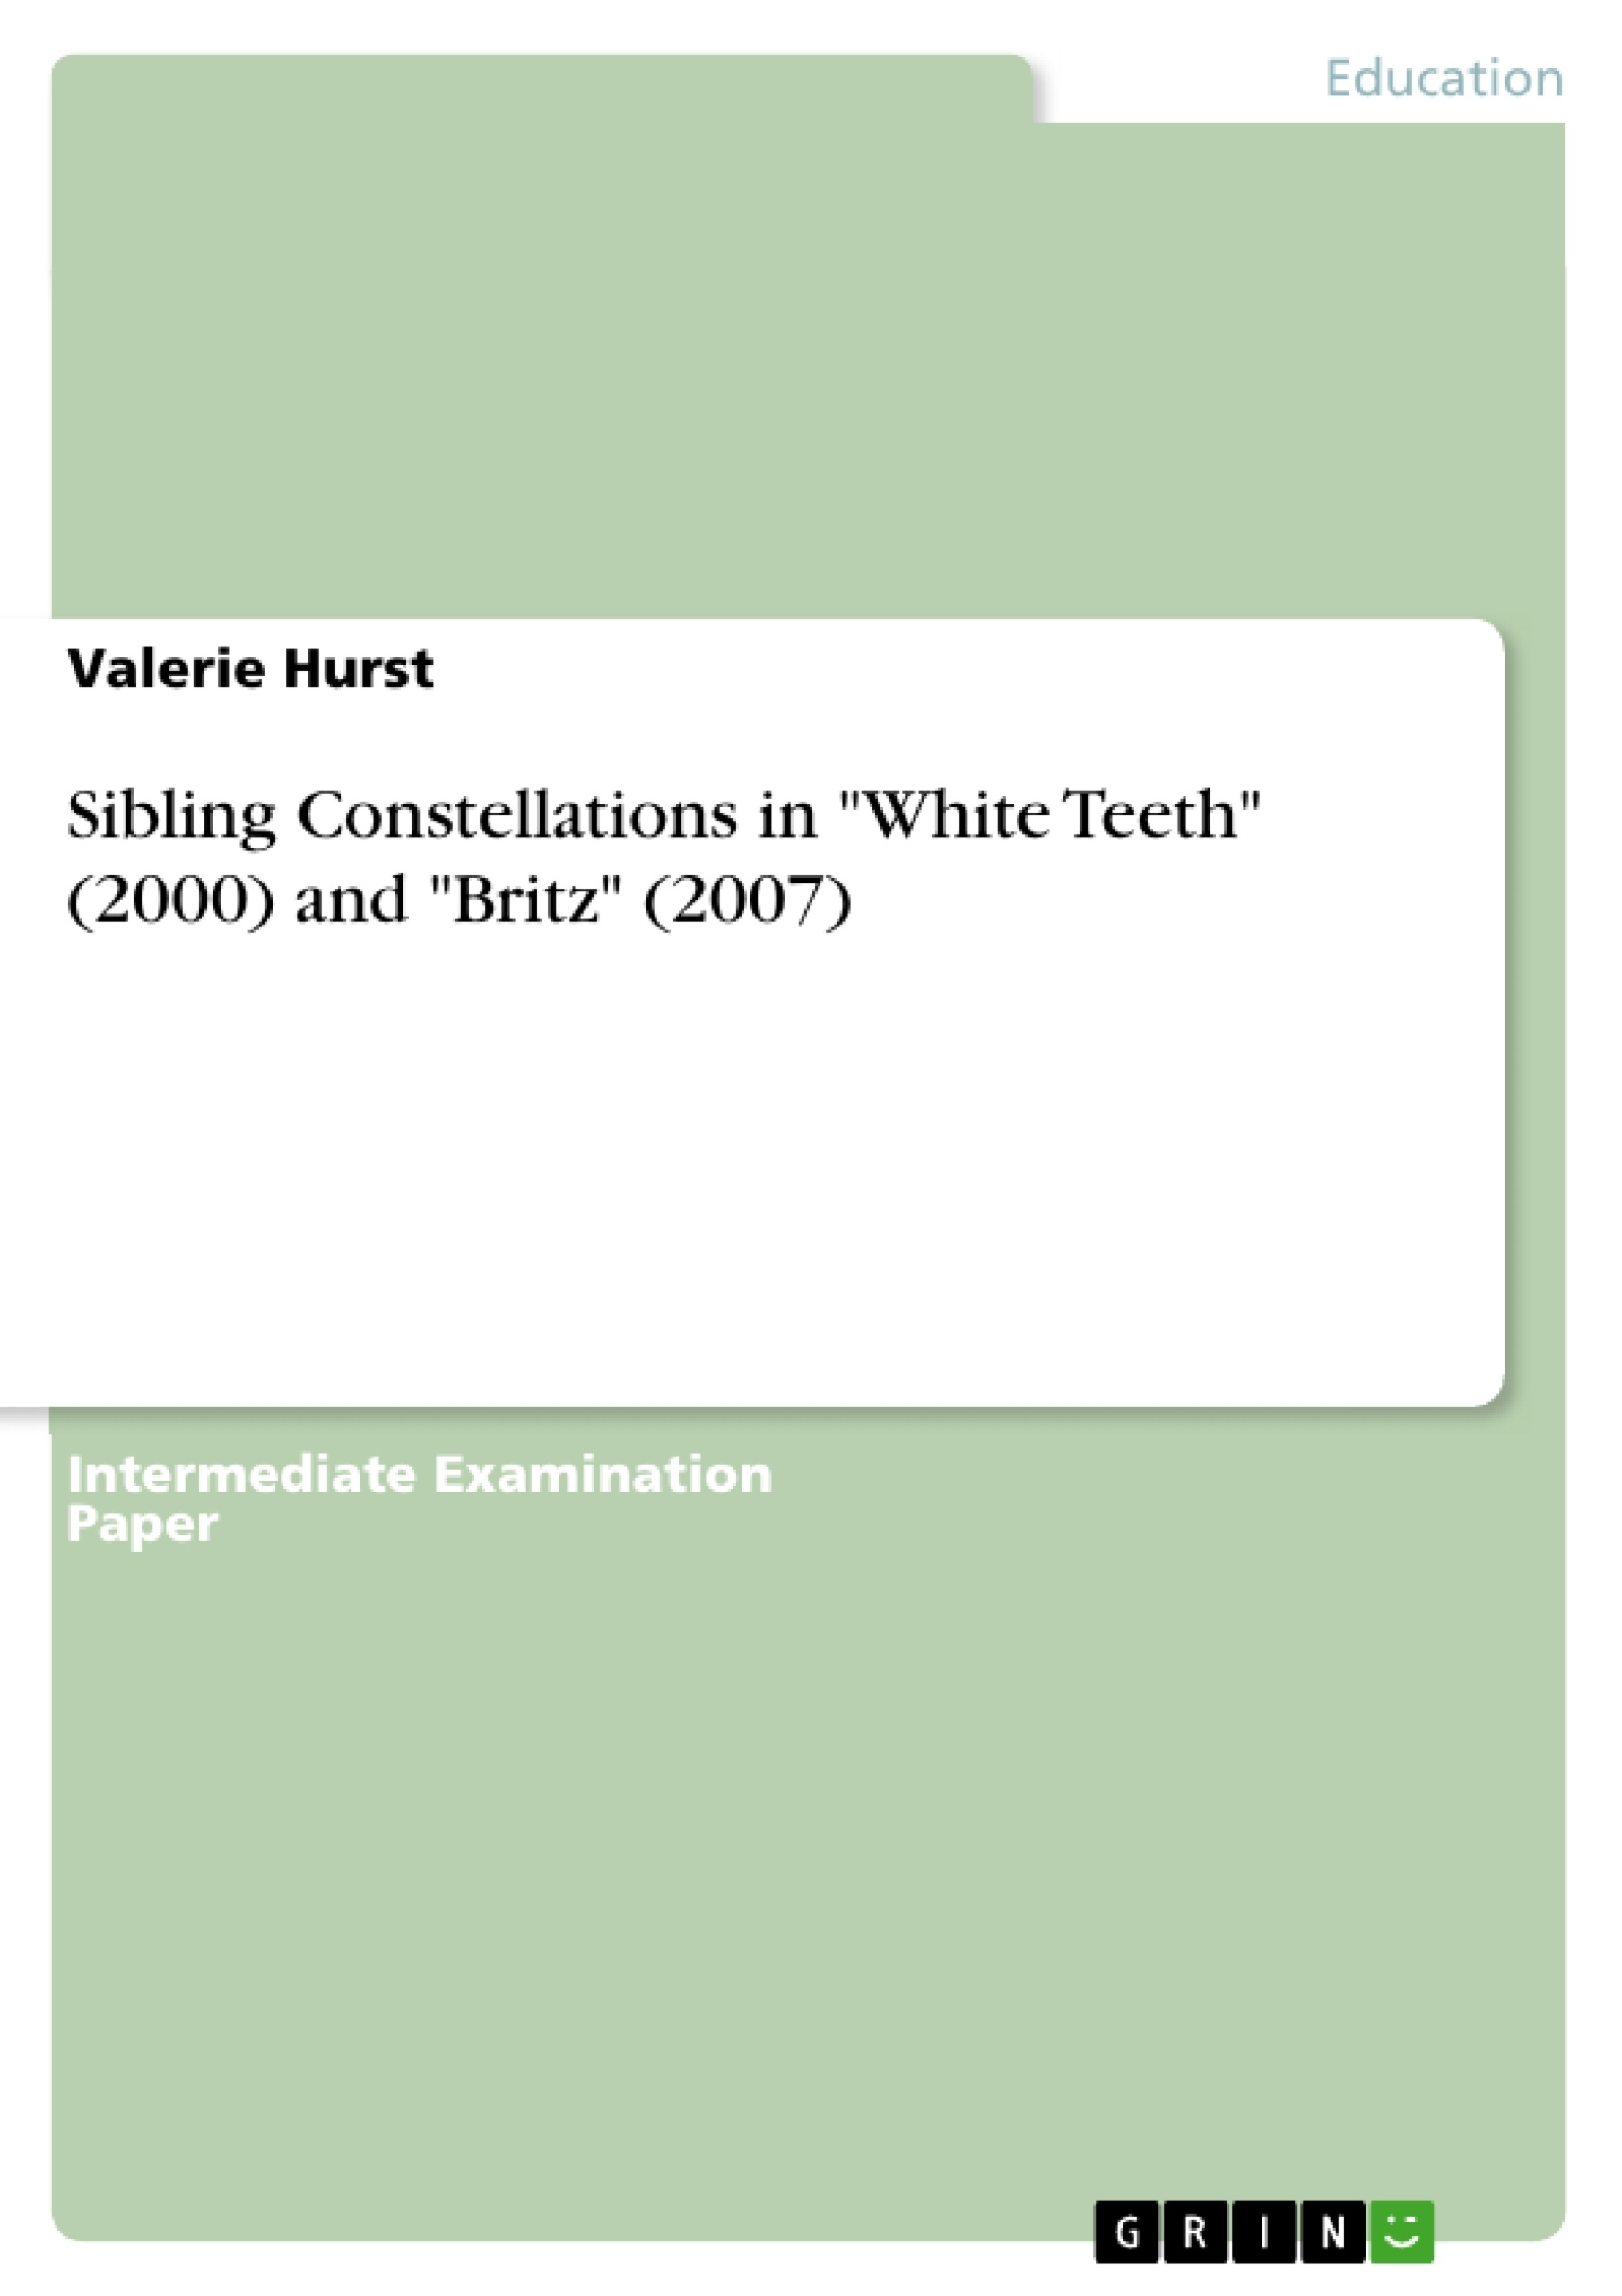 Title: Sibling Constellations in "White Teeth" (2000) and "Britz" (2007)